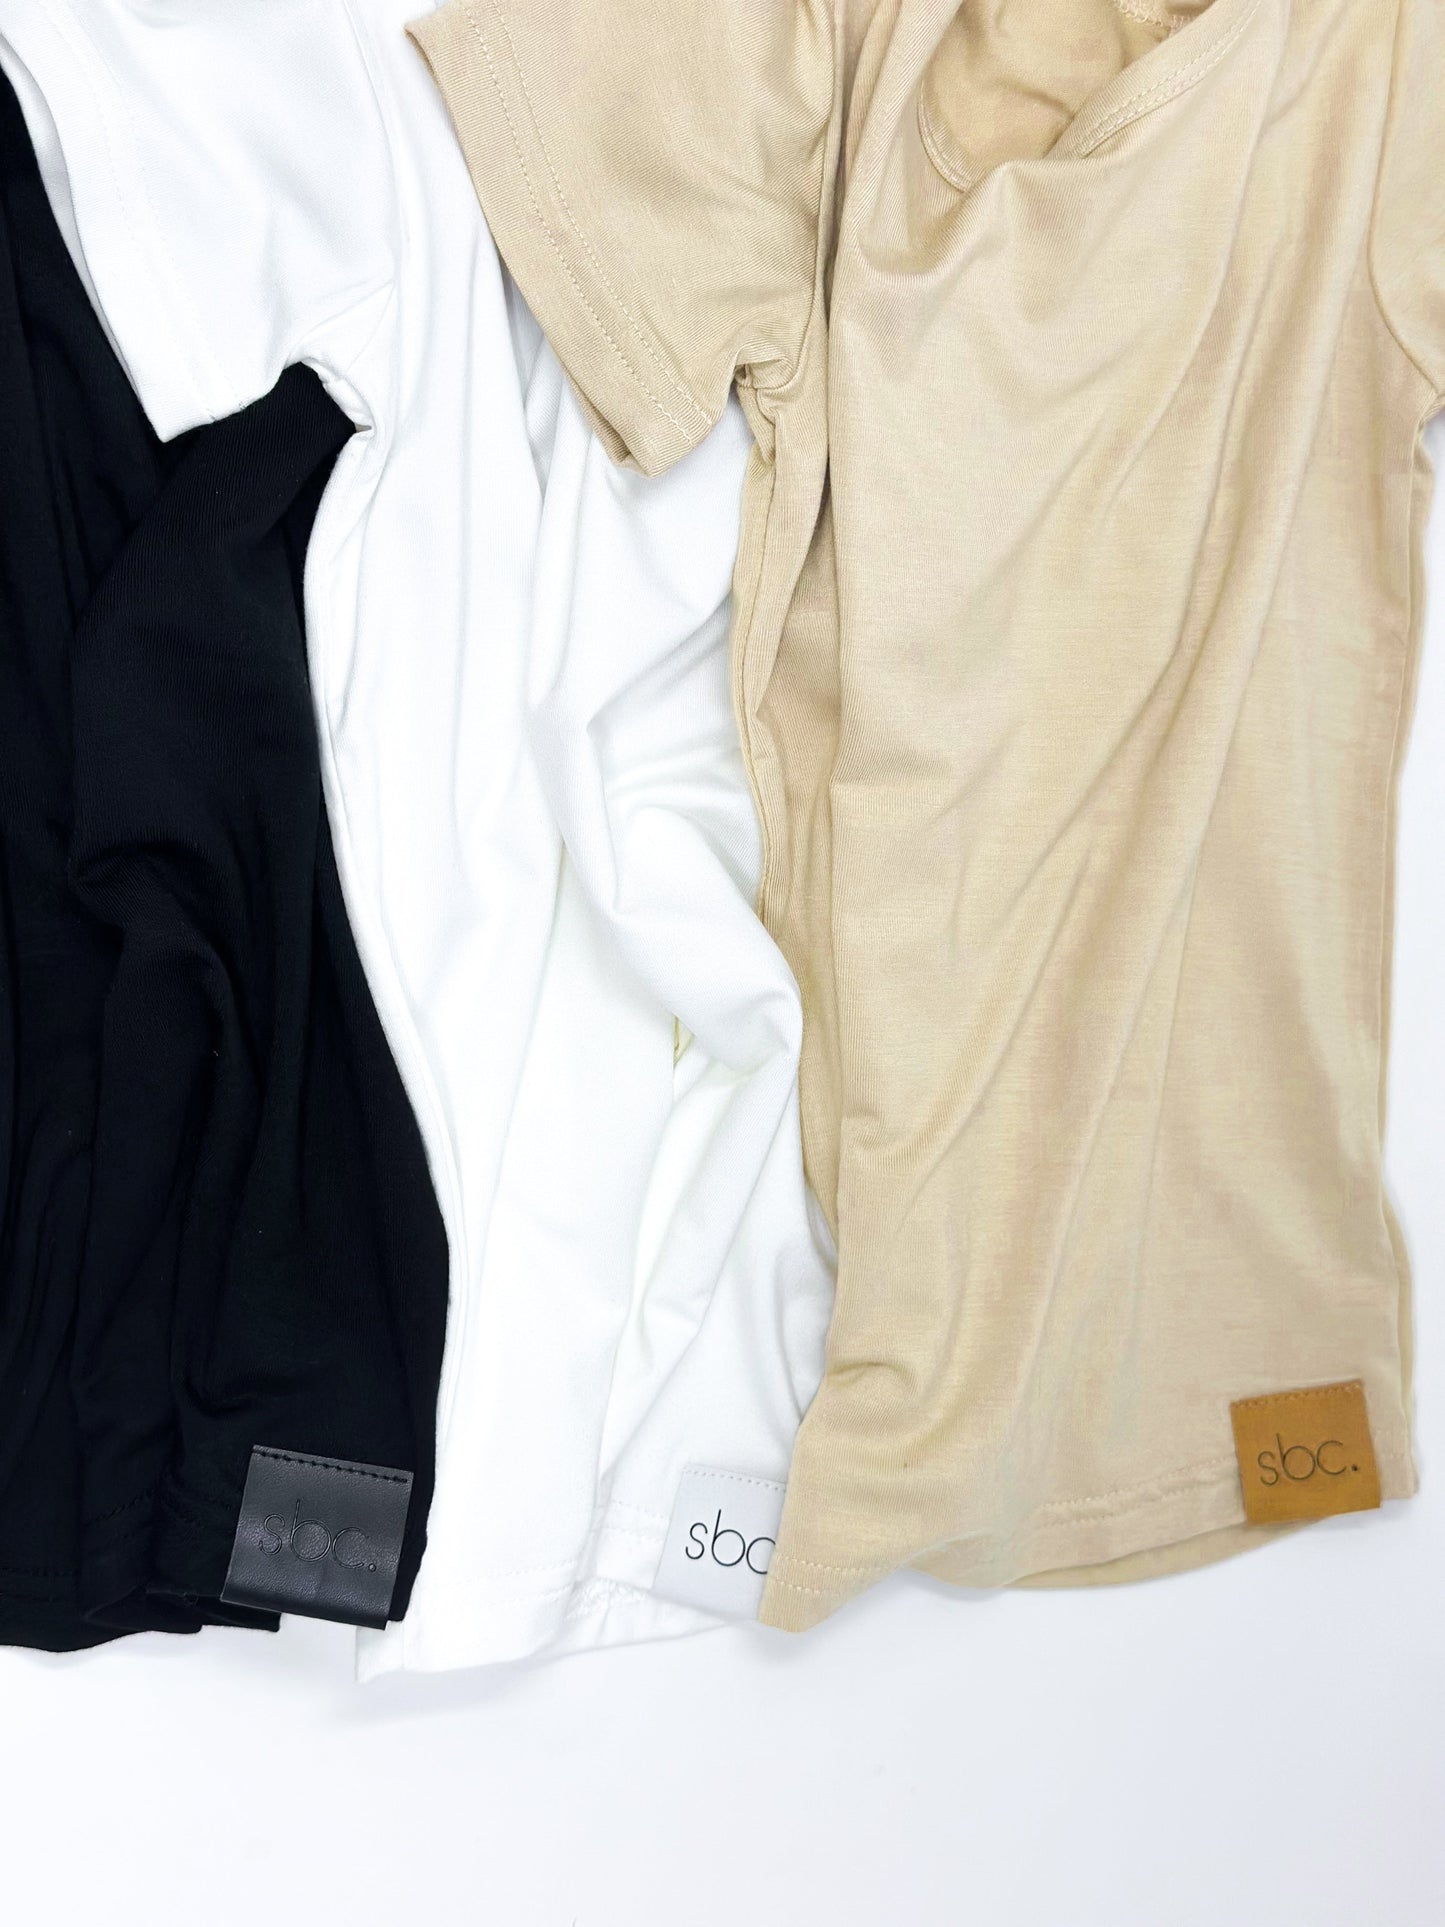 Everyday Bamboo Tees (3 Pack) - Bamboo Neutrals